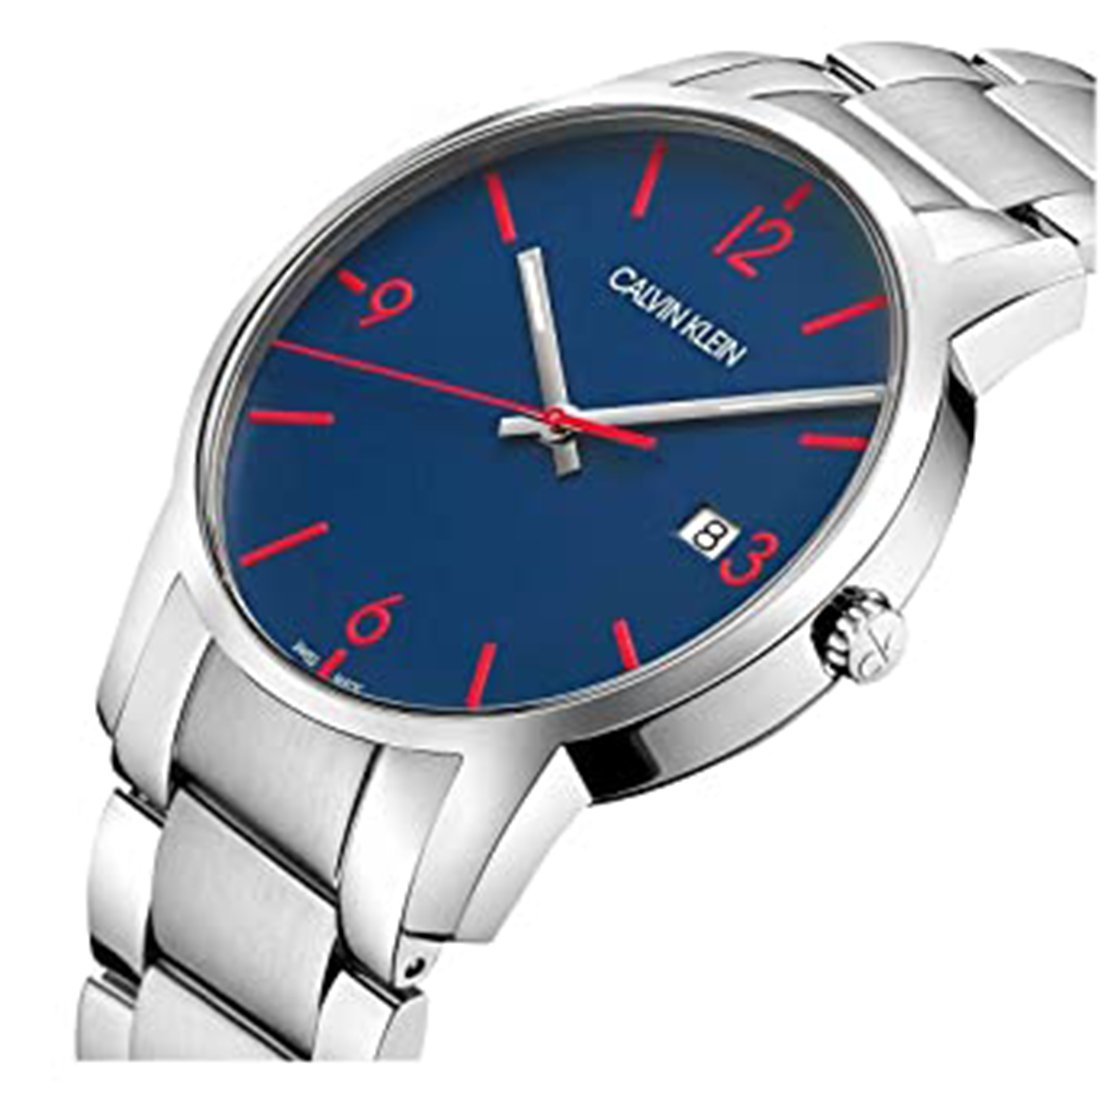 Calvin Klein City Blue Dial Stainless Steel - Watches & Crystals